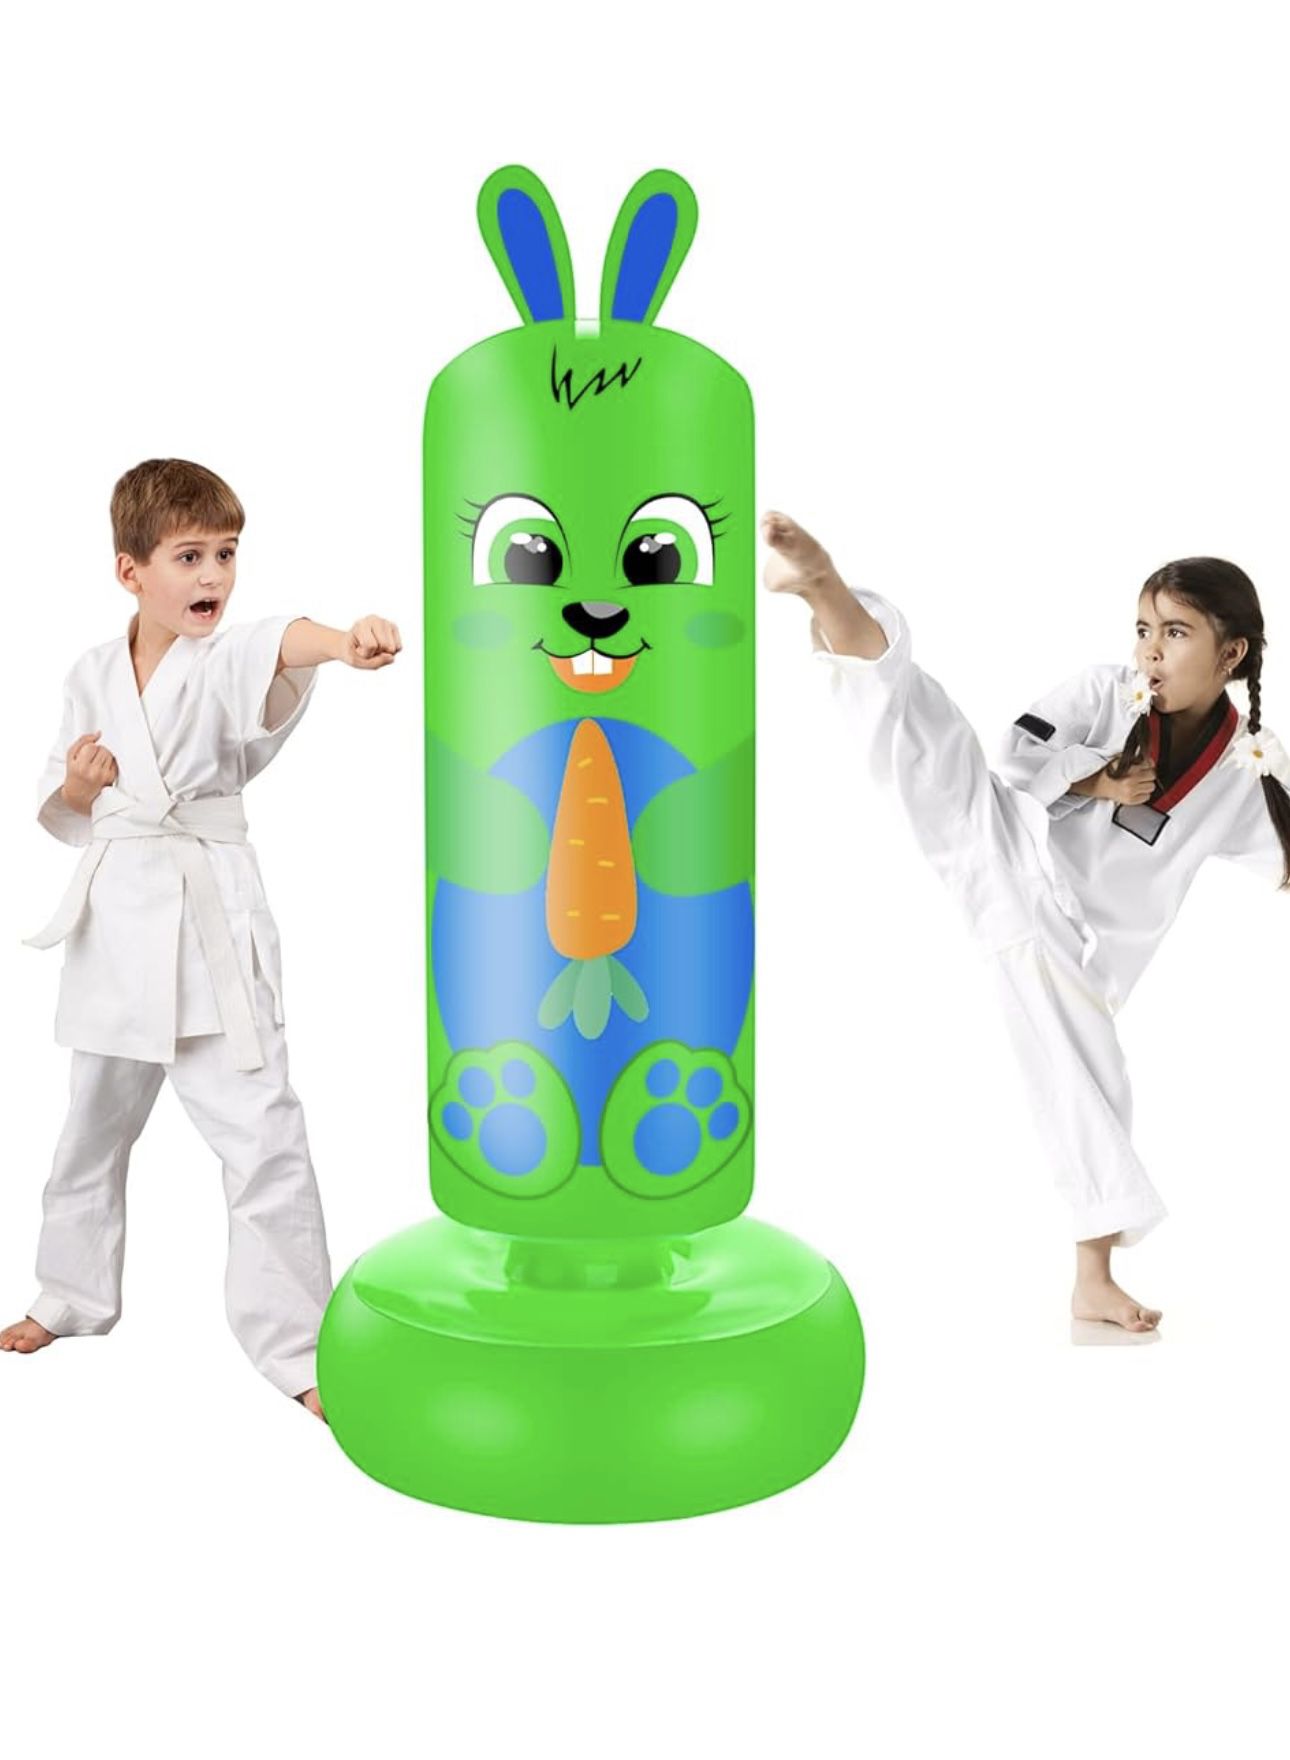 YORWHIN 66 Inch Inflatable Punching Bag for Kids, Free Standing Boxing Bag Punching Toy, Bounce Back Bag Great for Children's Easter Christmas Birthda